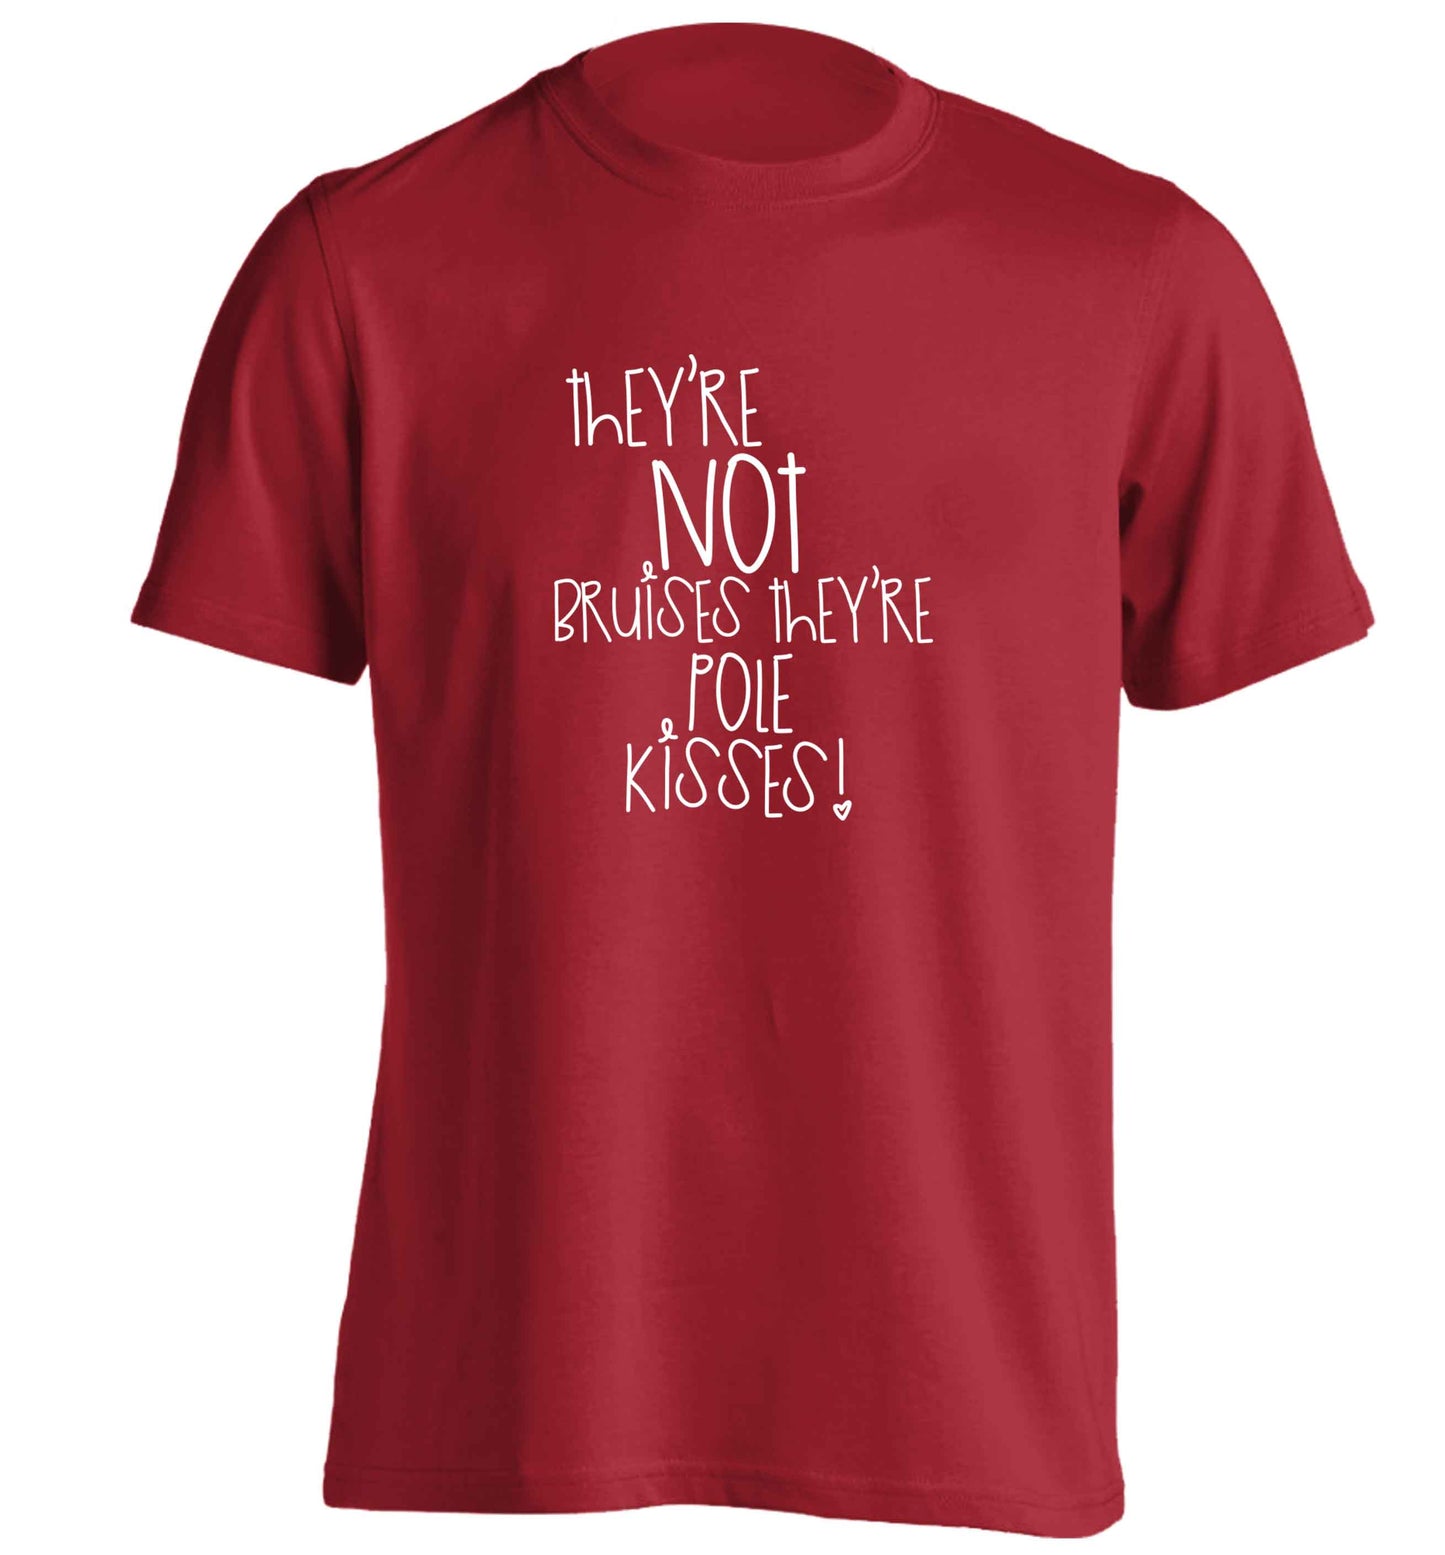 They're not bruises they're pole kisses adults unisex red Tshirt 2XL